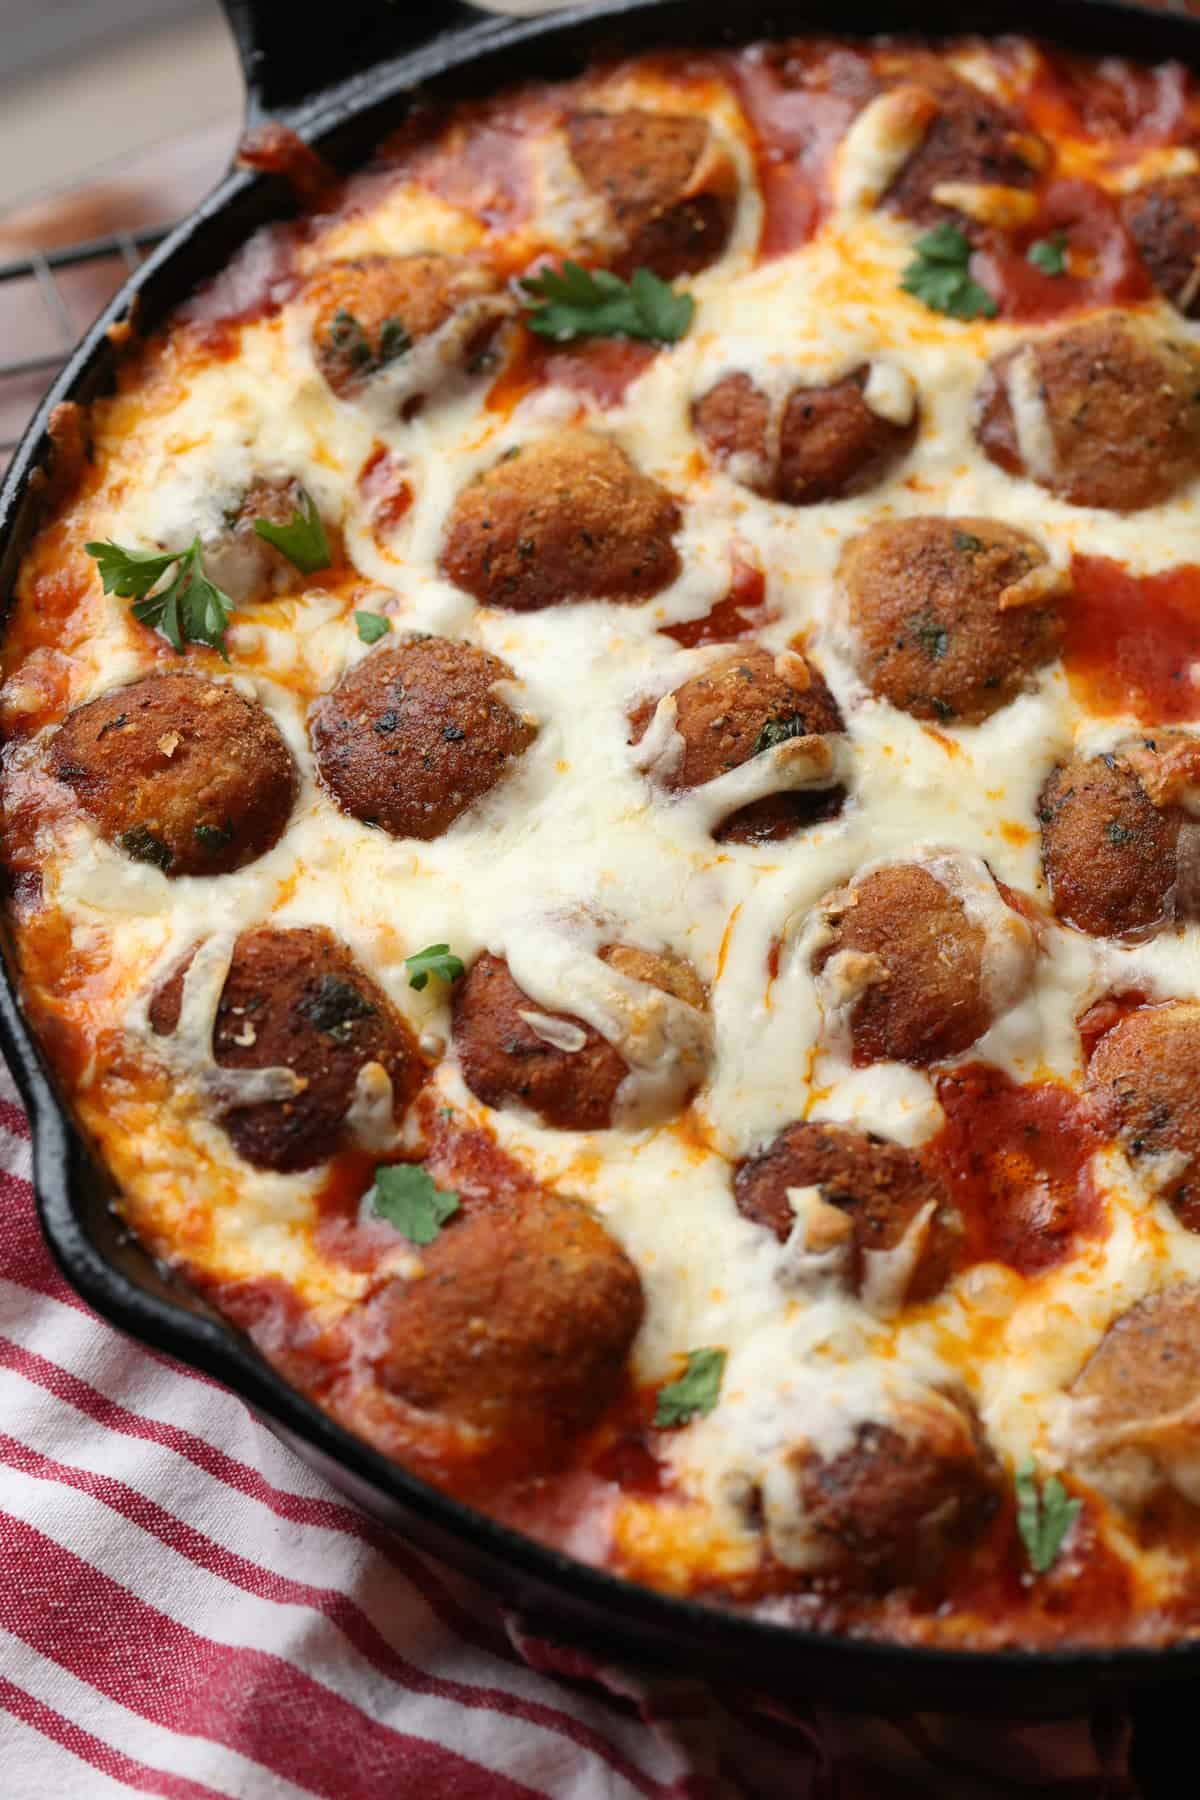 Chicken Parm meatballs covered in melted cheese